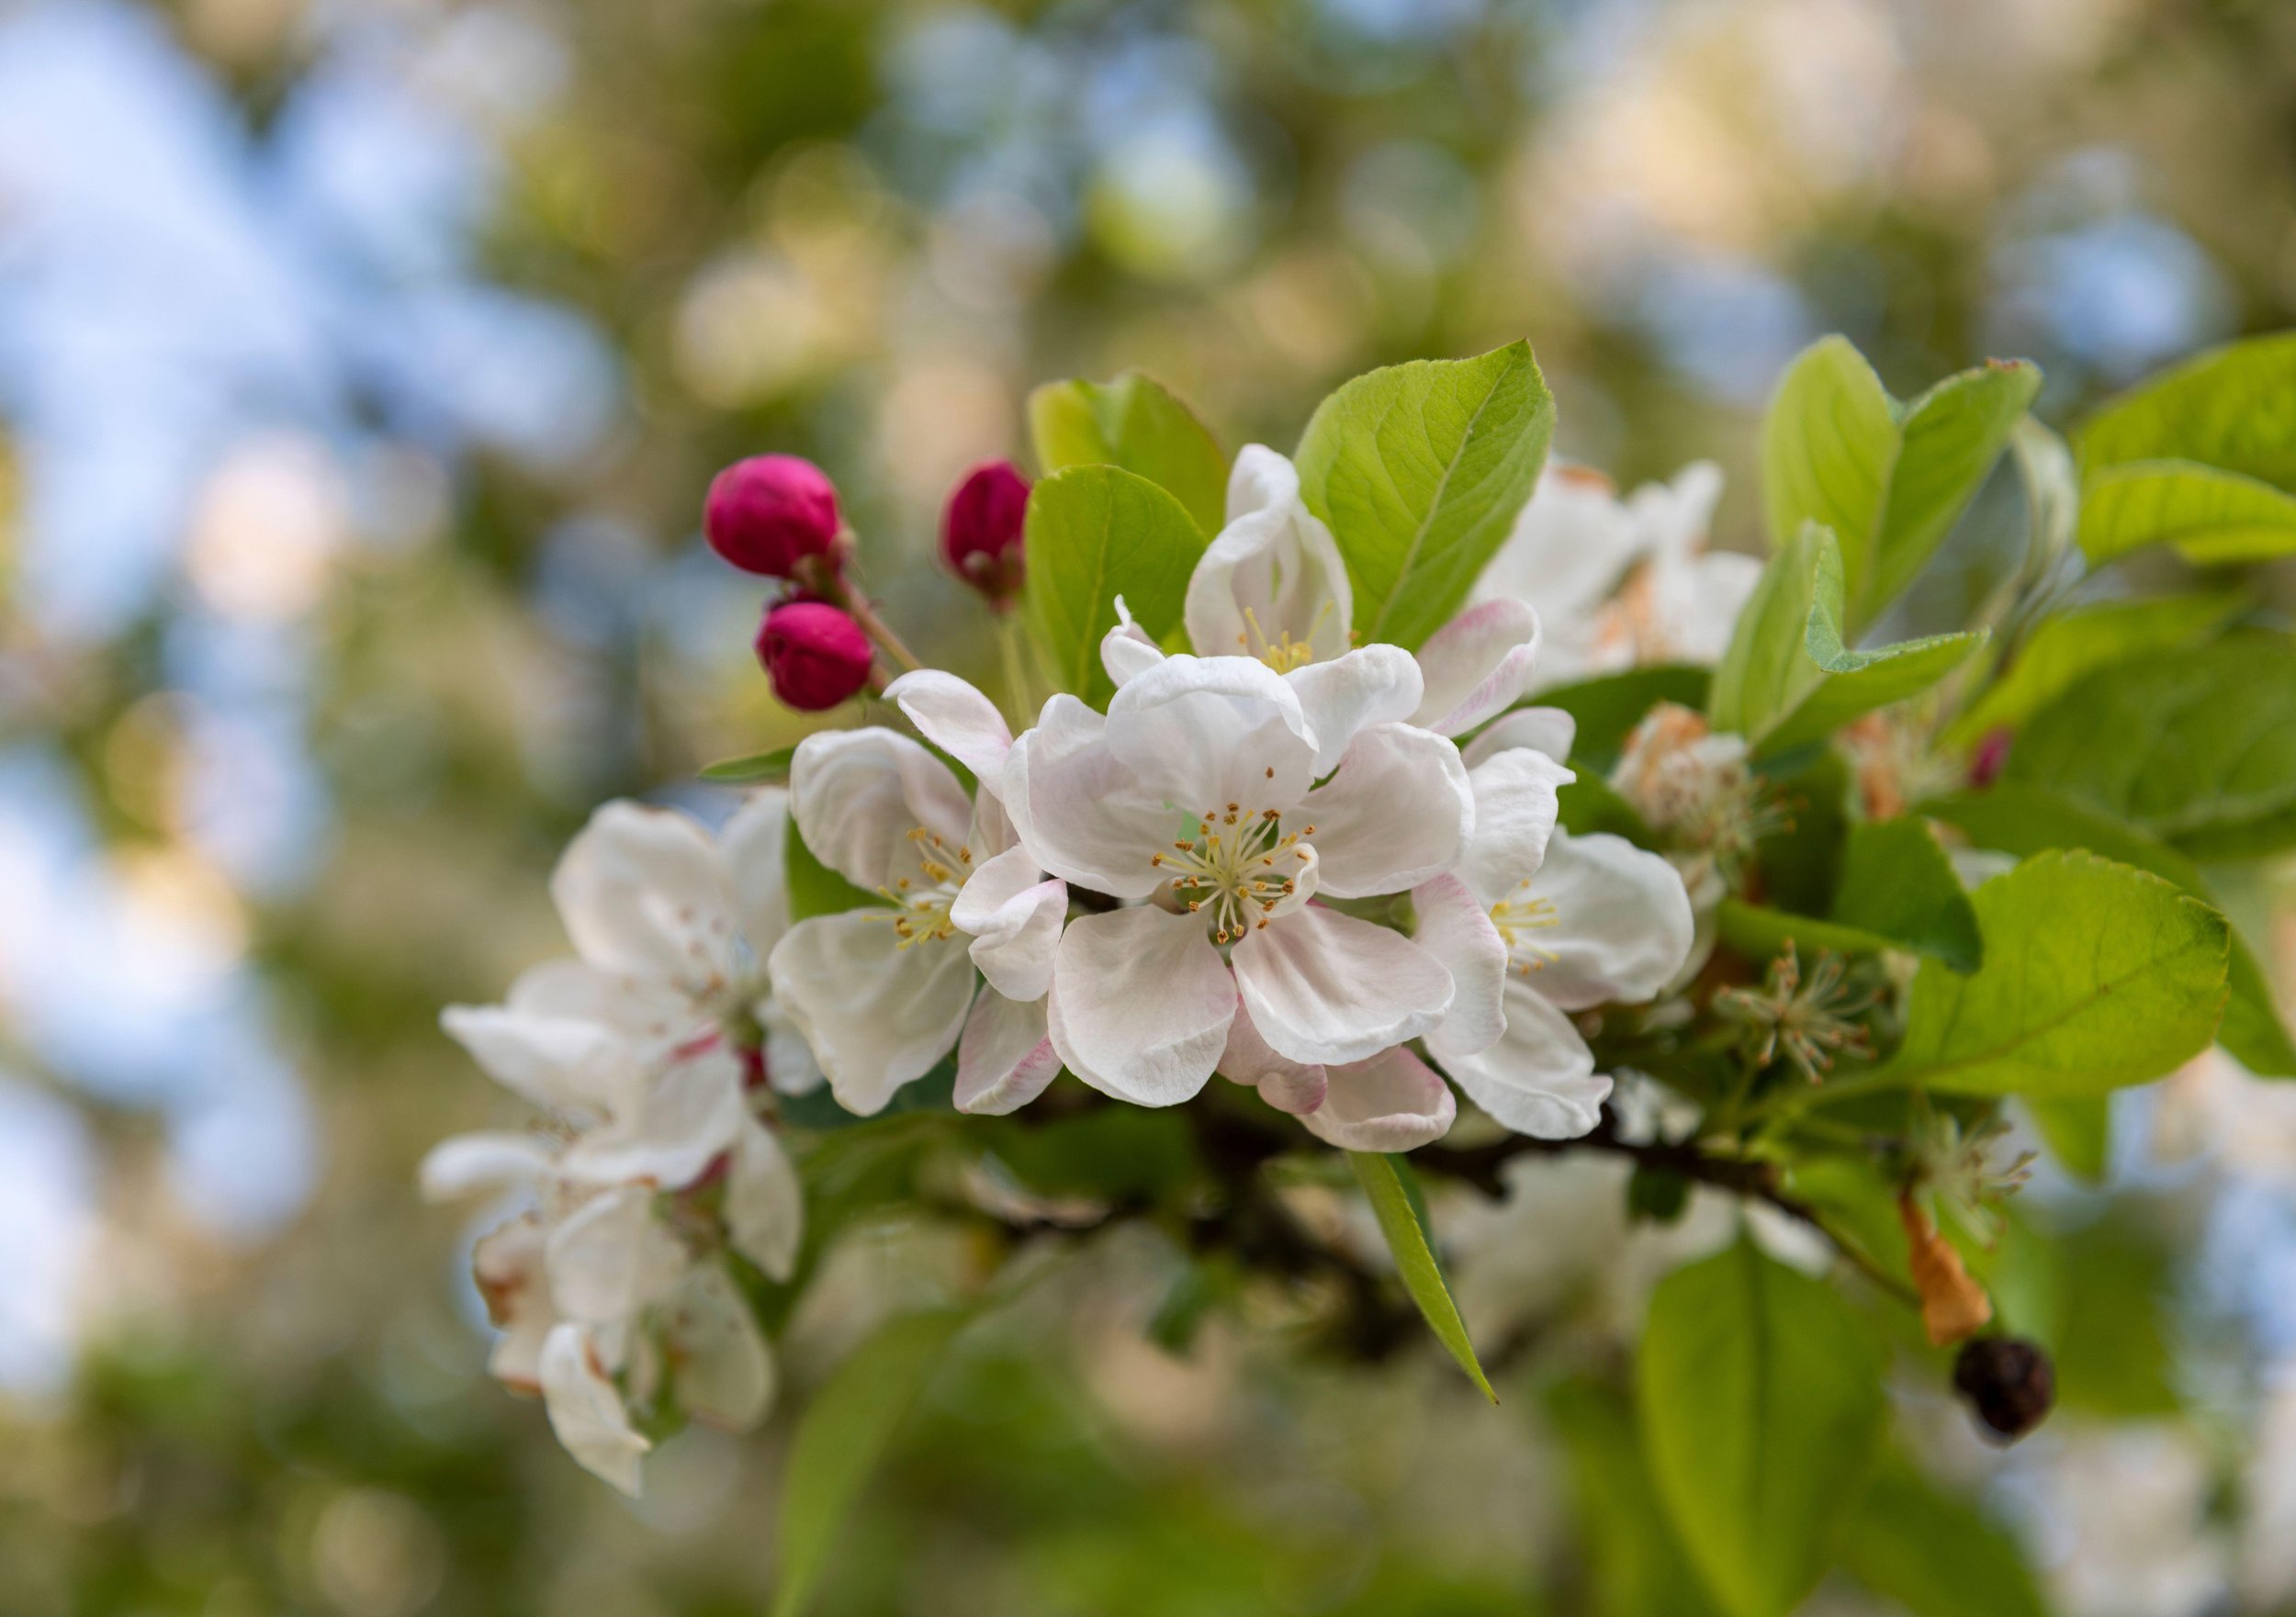 A blossoming crab apple